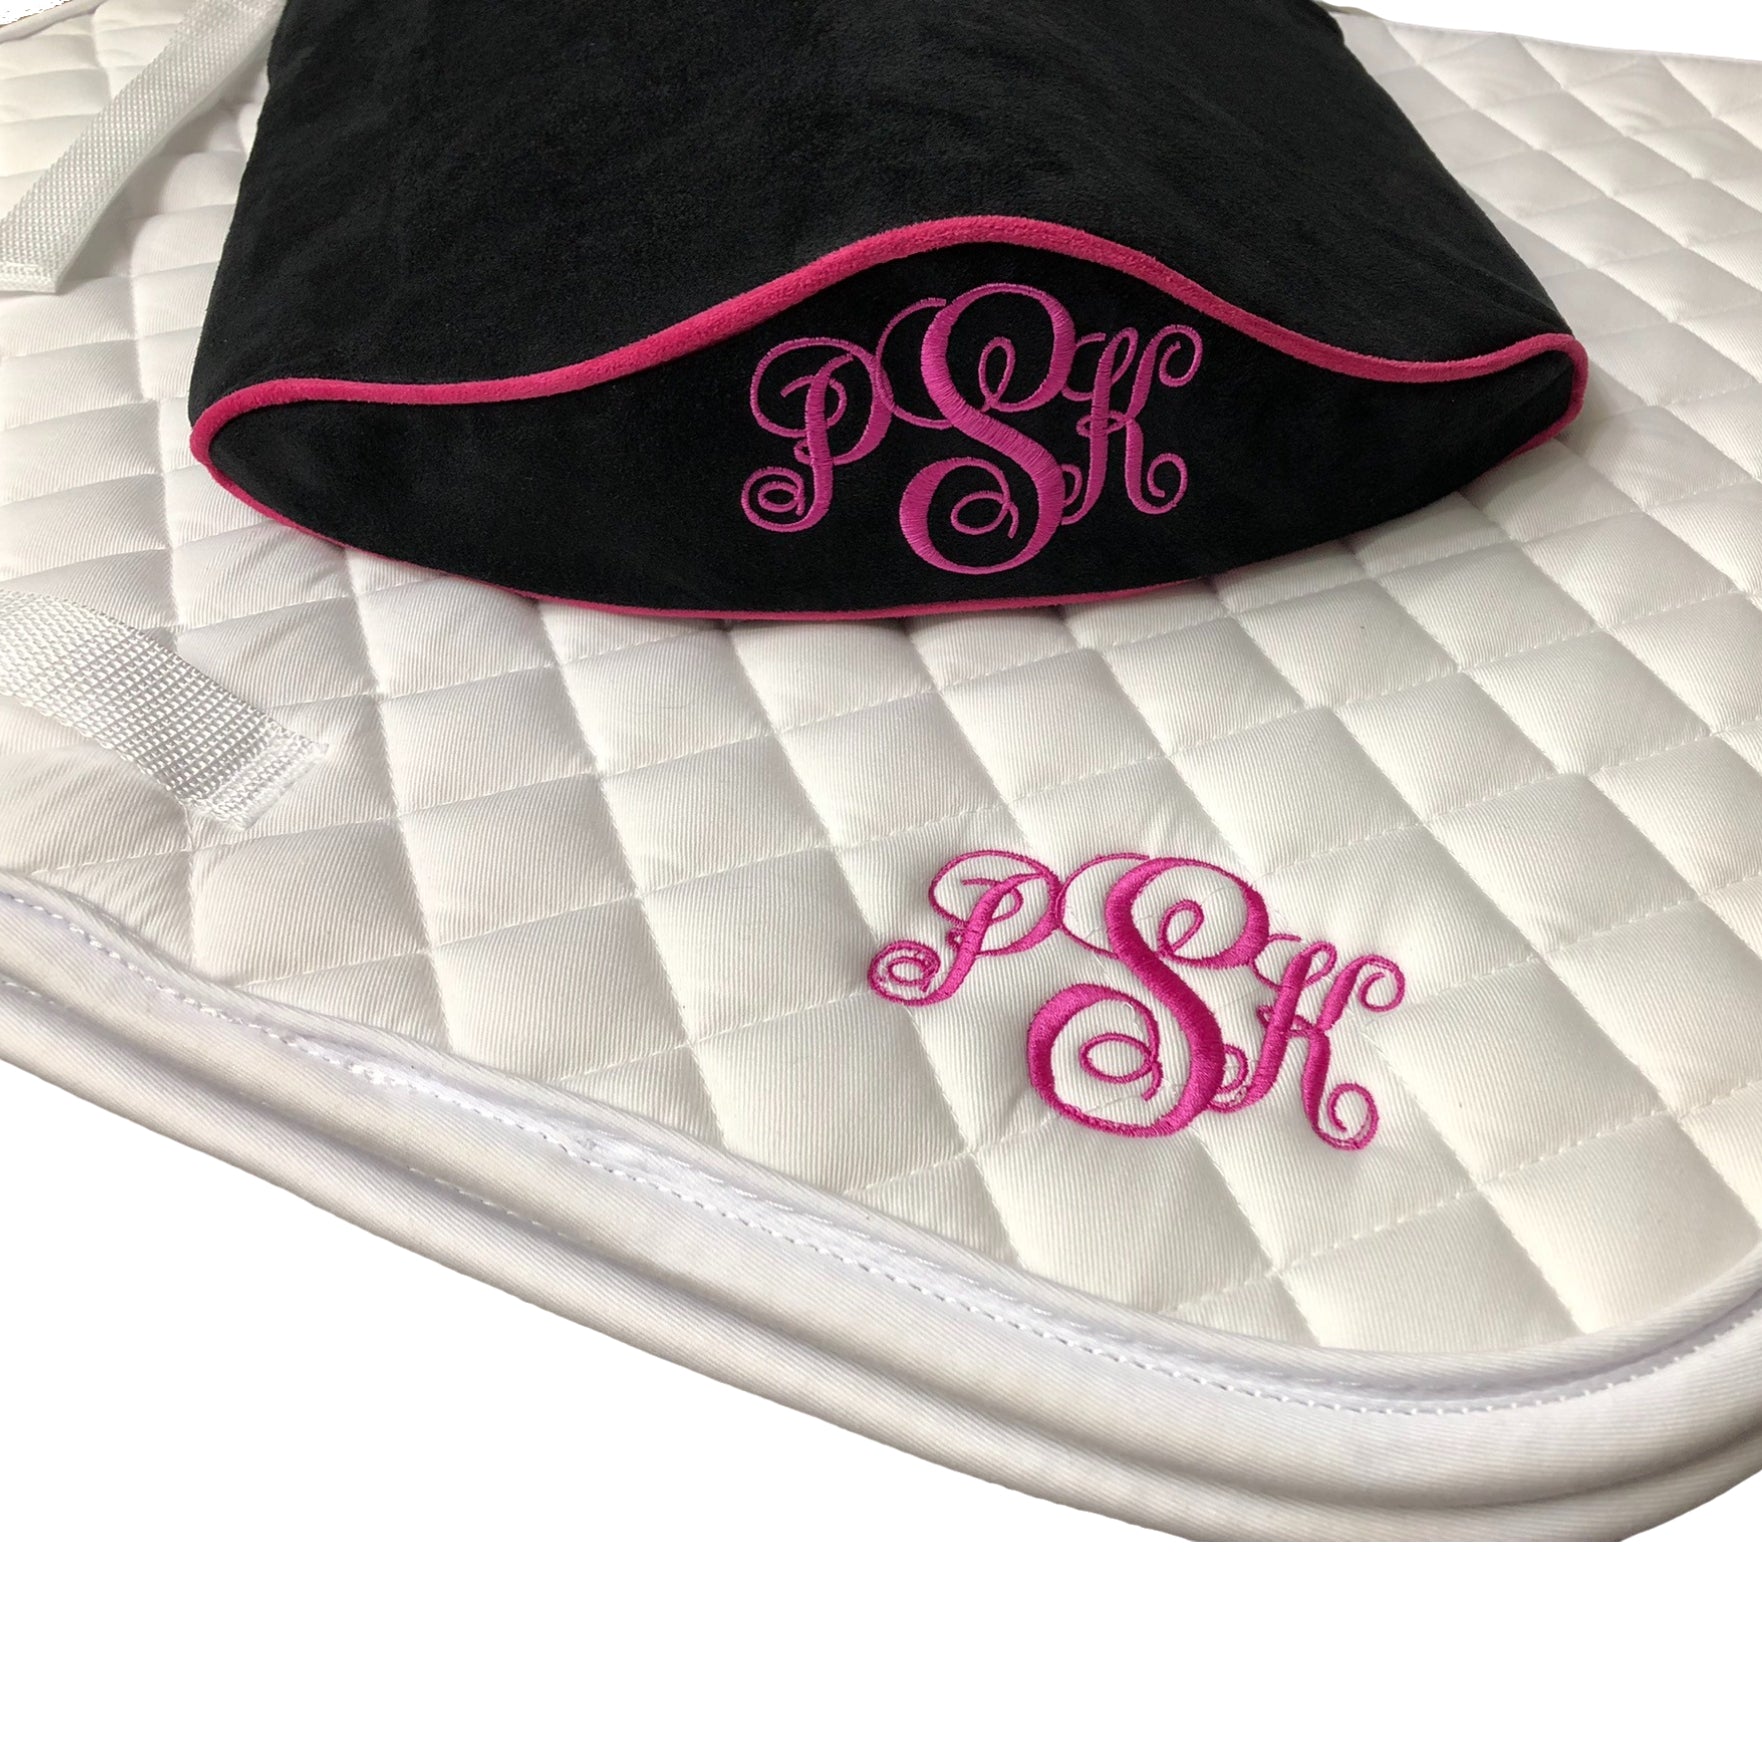 SaddleMattress Supreme - Personalized in Black or Dark Blue with matching White Saddle Pad